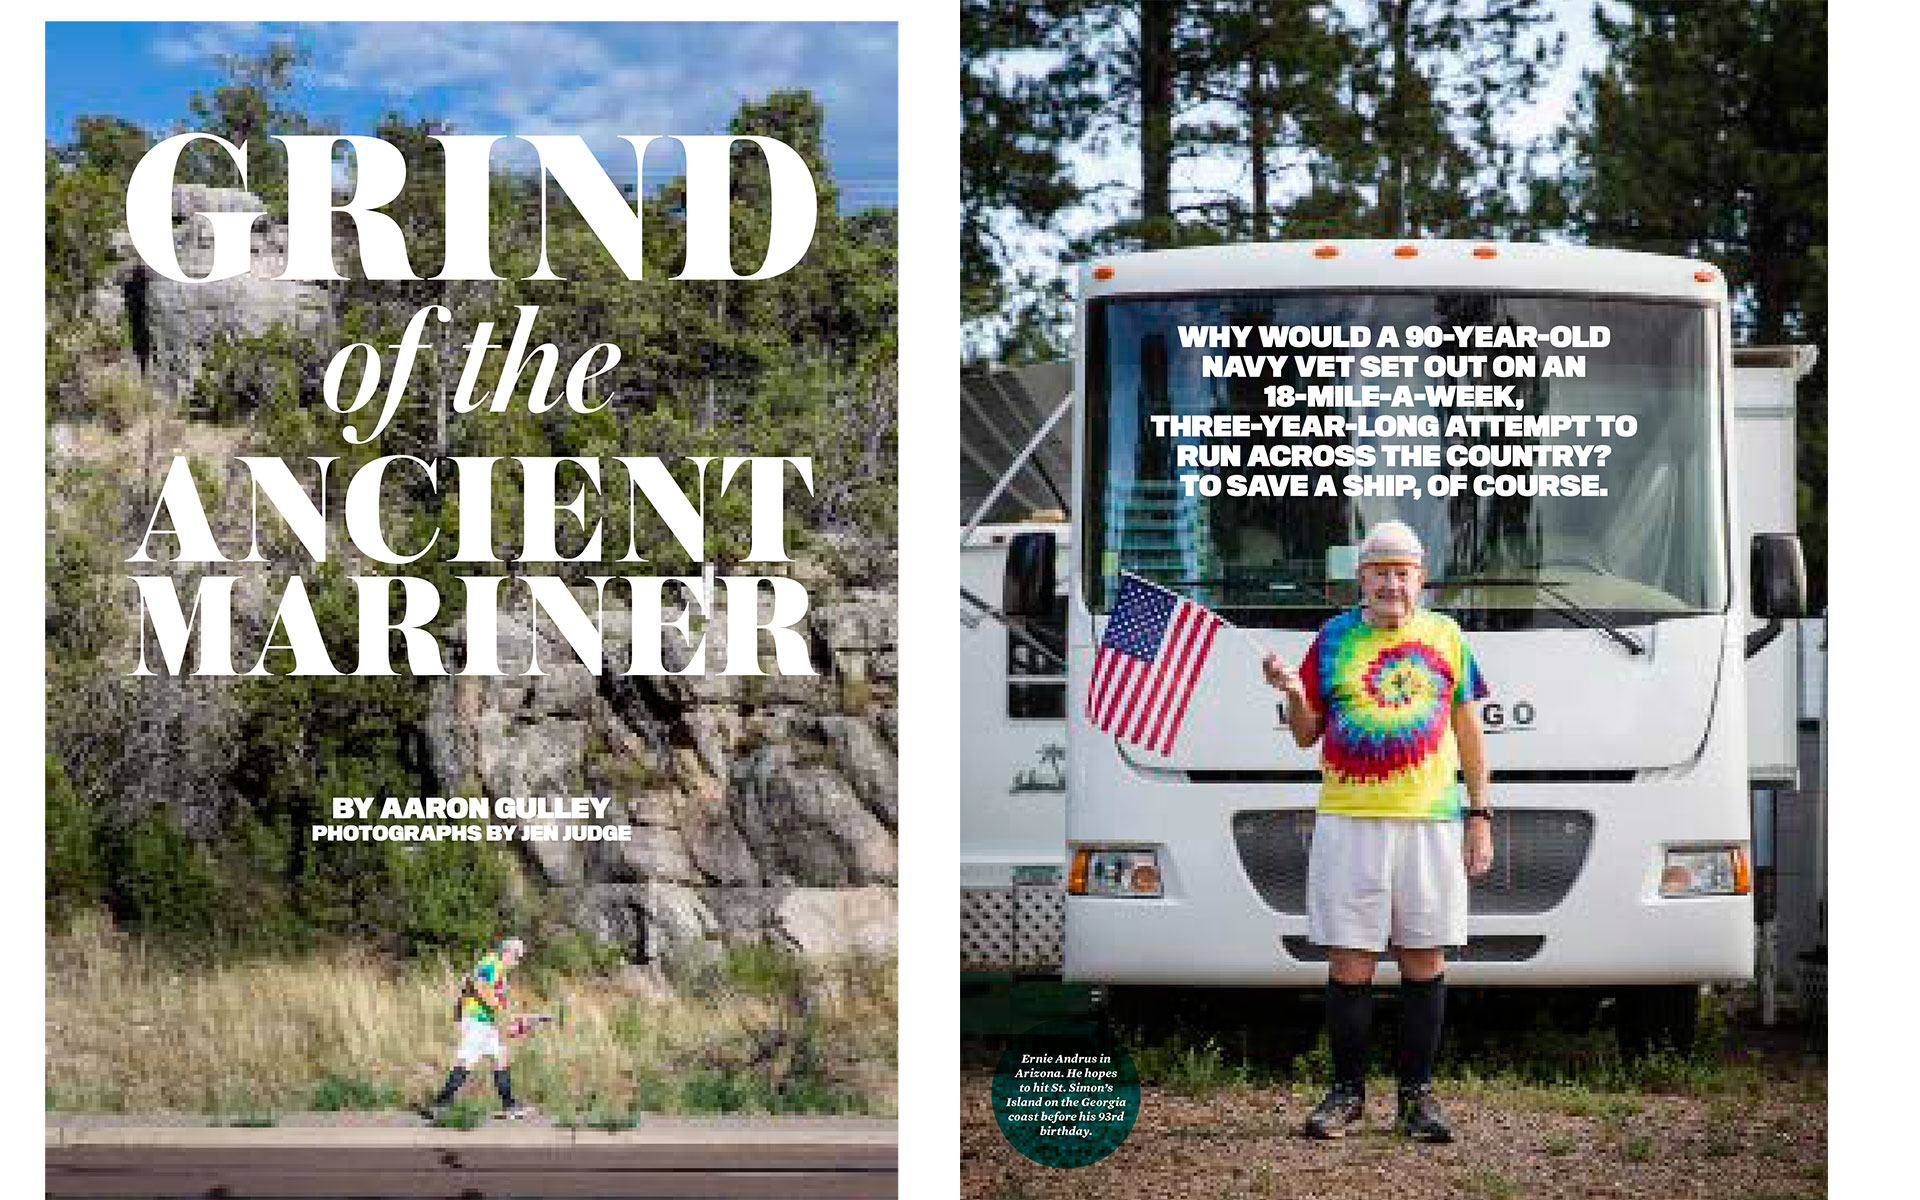 <p style="text-align: center;"><b><font color="2a2871">Grind Of The Ancient Mariner, Runners World, March 2015</font></b>
</p>
Why would a 90-year-old navy vet set out on an 18-mile-a-week, nearly-three-year-long attempt to run across the country? To save a ship, of course.
<p style="text-align: center;"><a href="/users/AaronGulley18670/RW_Ernie_3-15.pdf" onclick="window.open(this.href, '', 'resizable=no,status=no,location=no,toolbar=no,menubar=no,fullscreen=no,scrollbars=no,dependent=no,width=900'); return false;">Read the Story</a></p>
